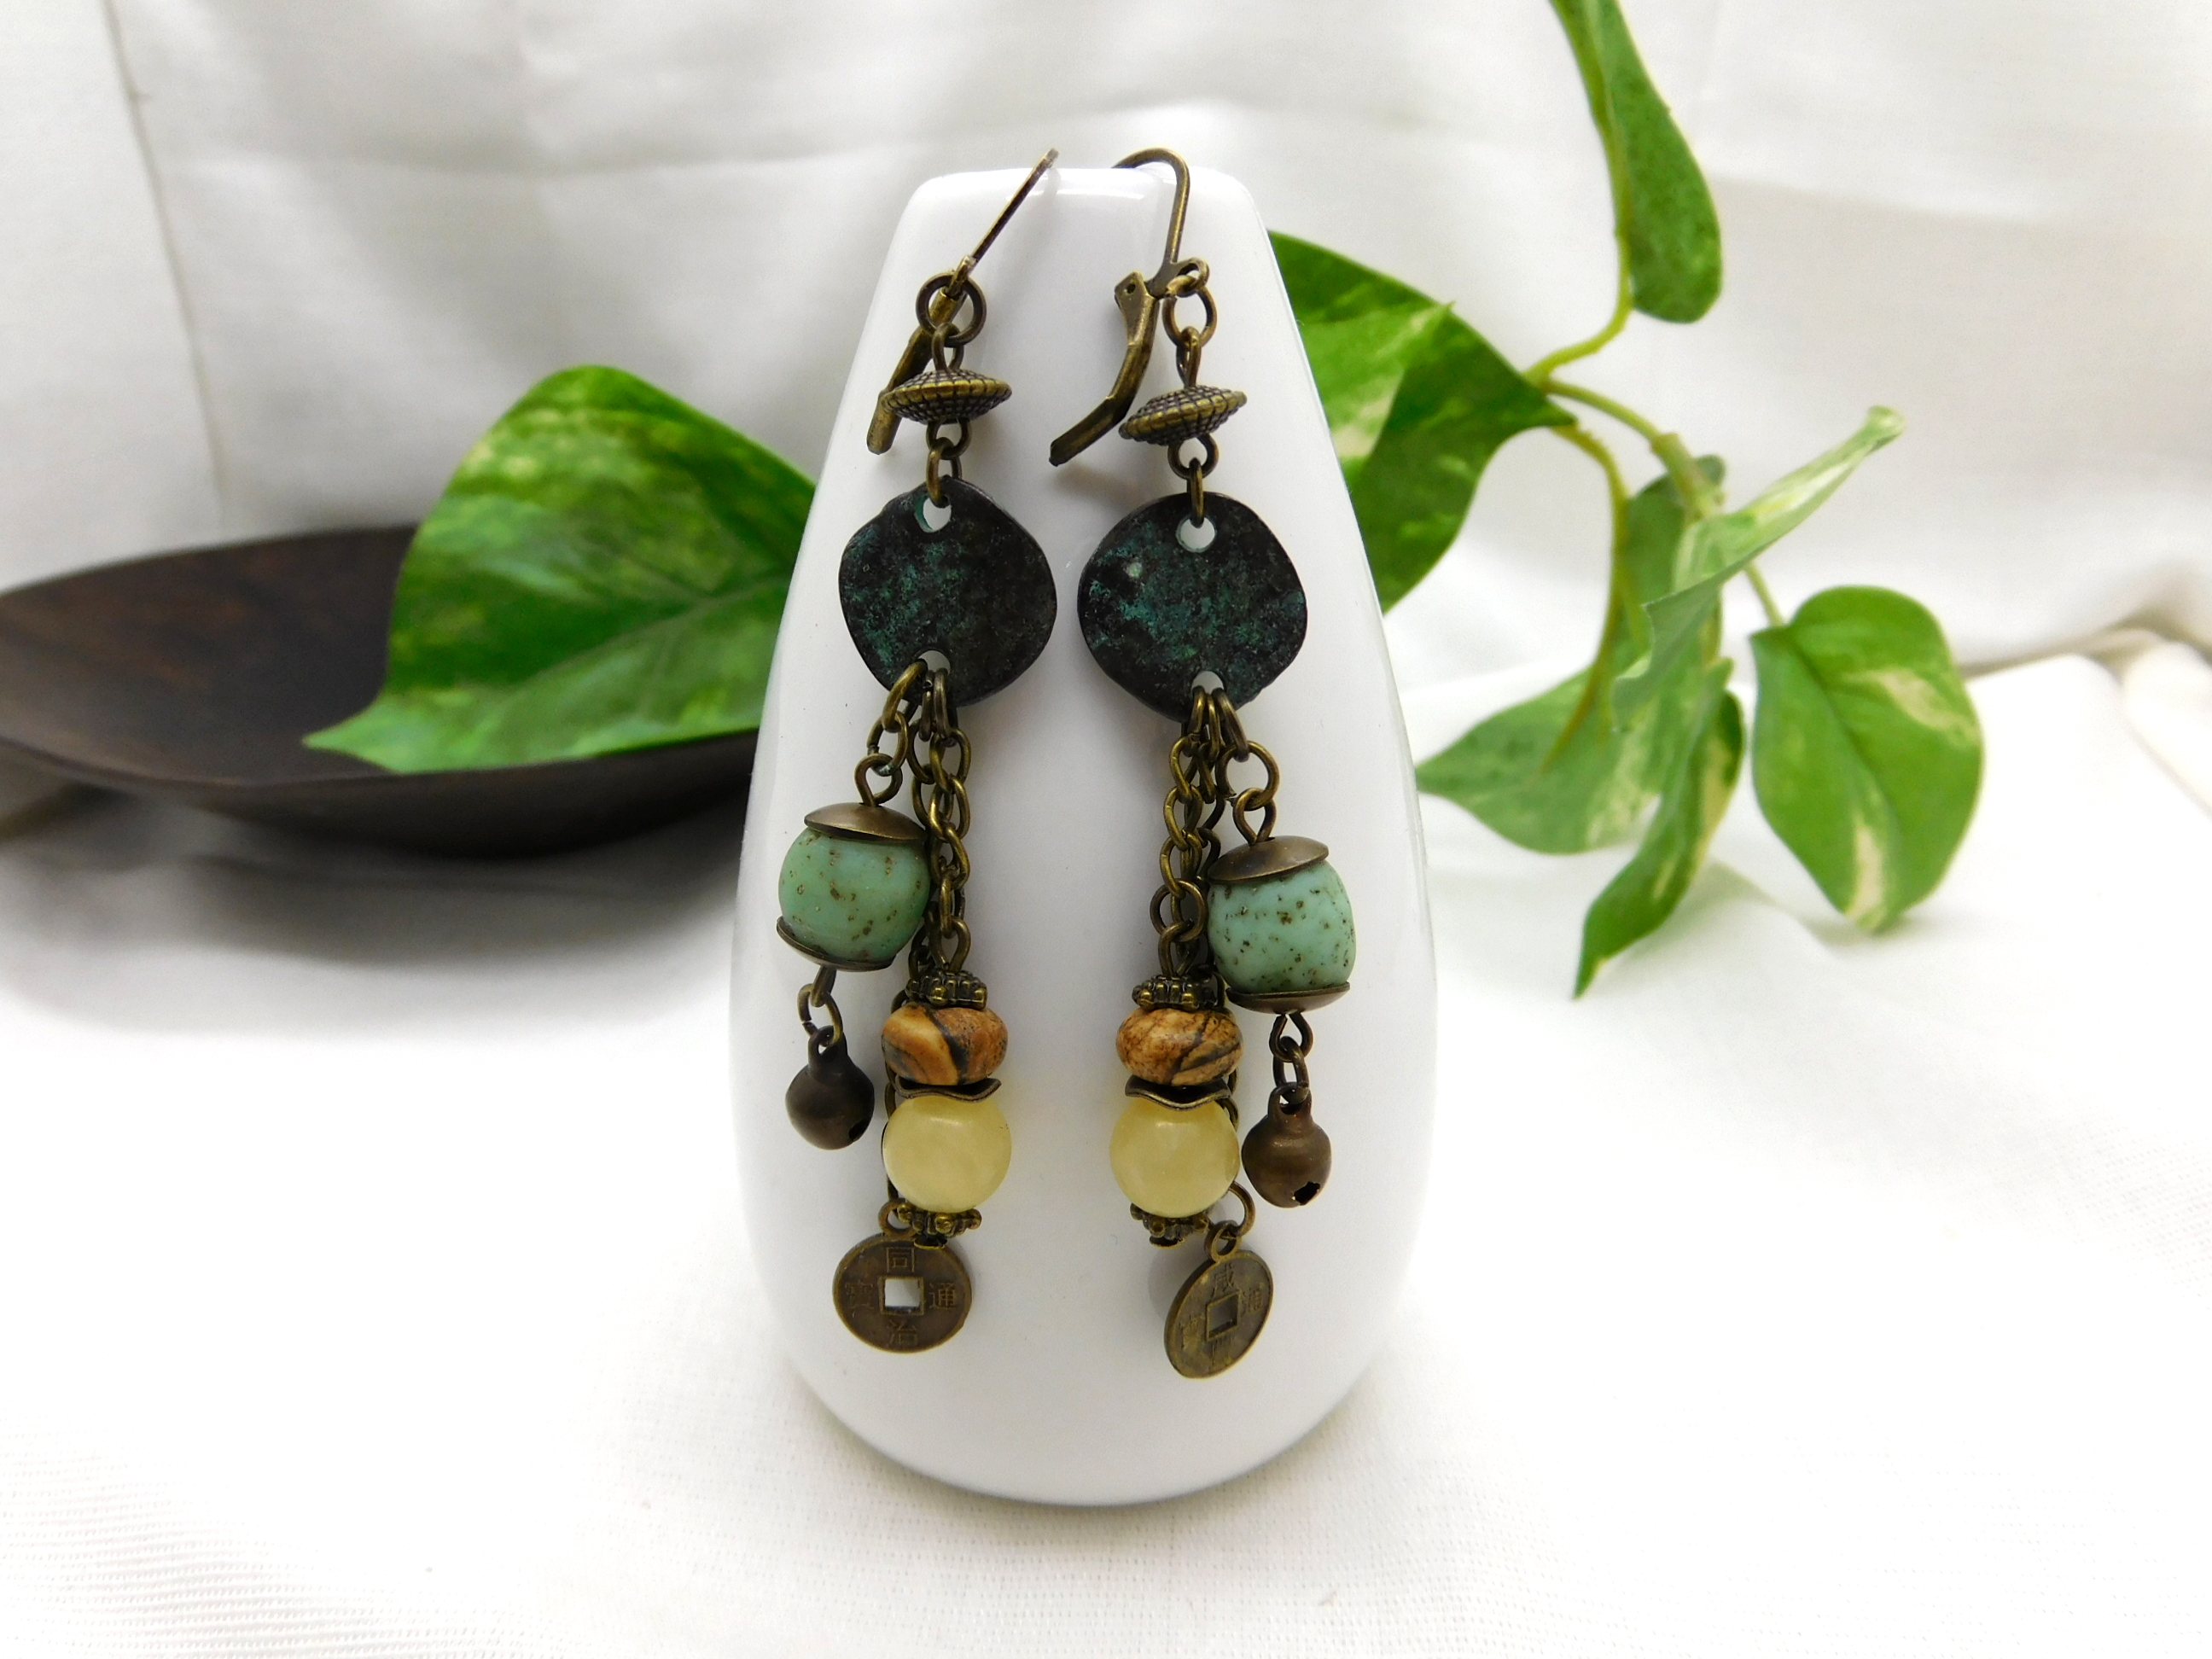 rustic earrings with an antique look and patina